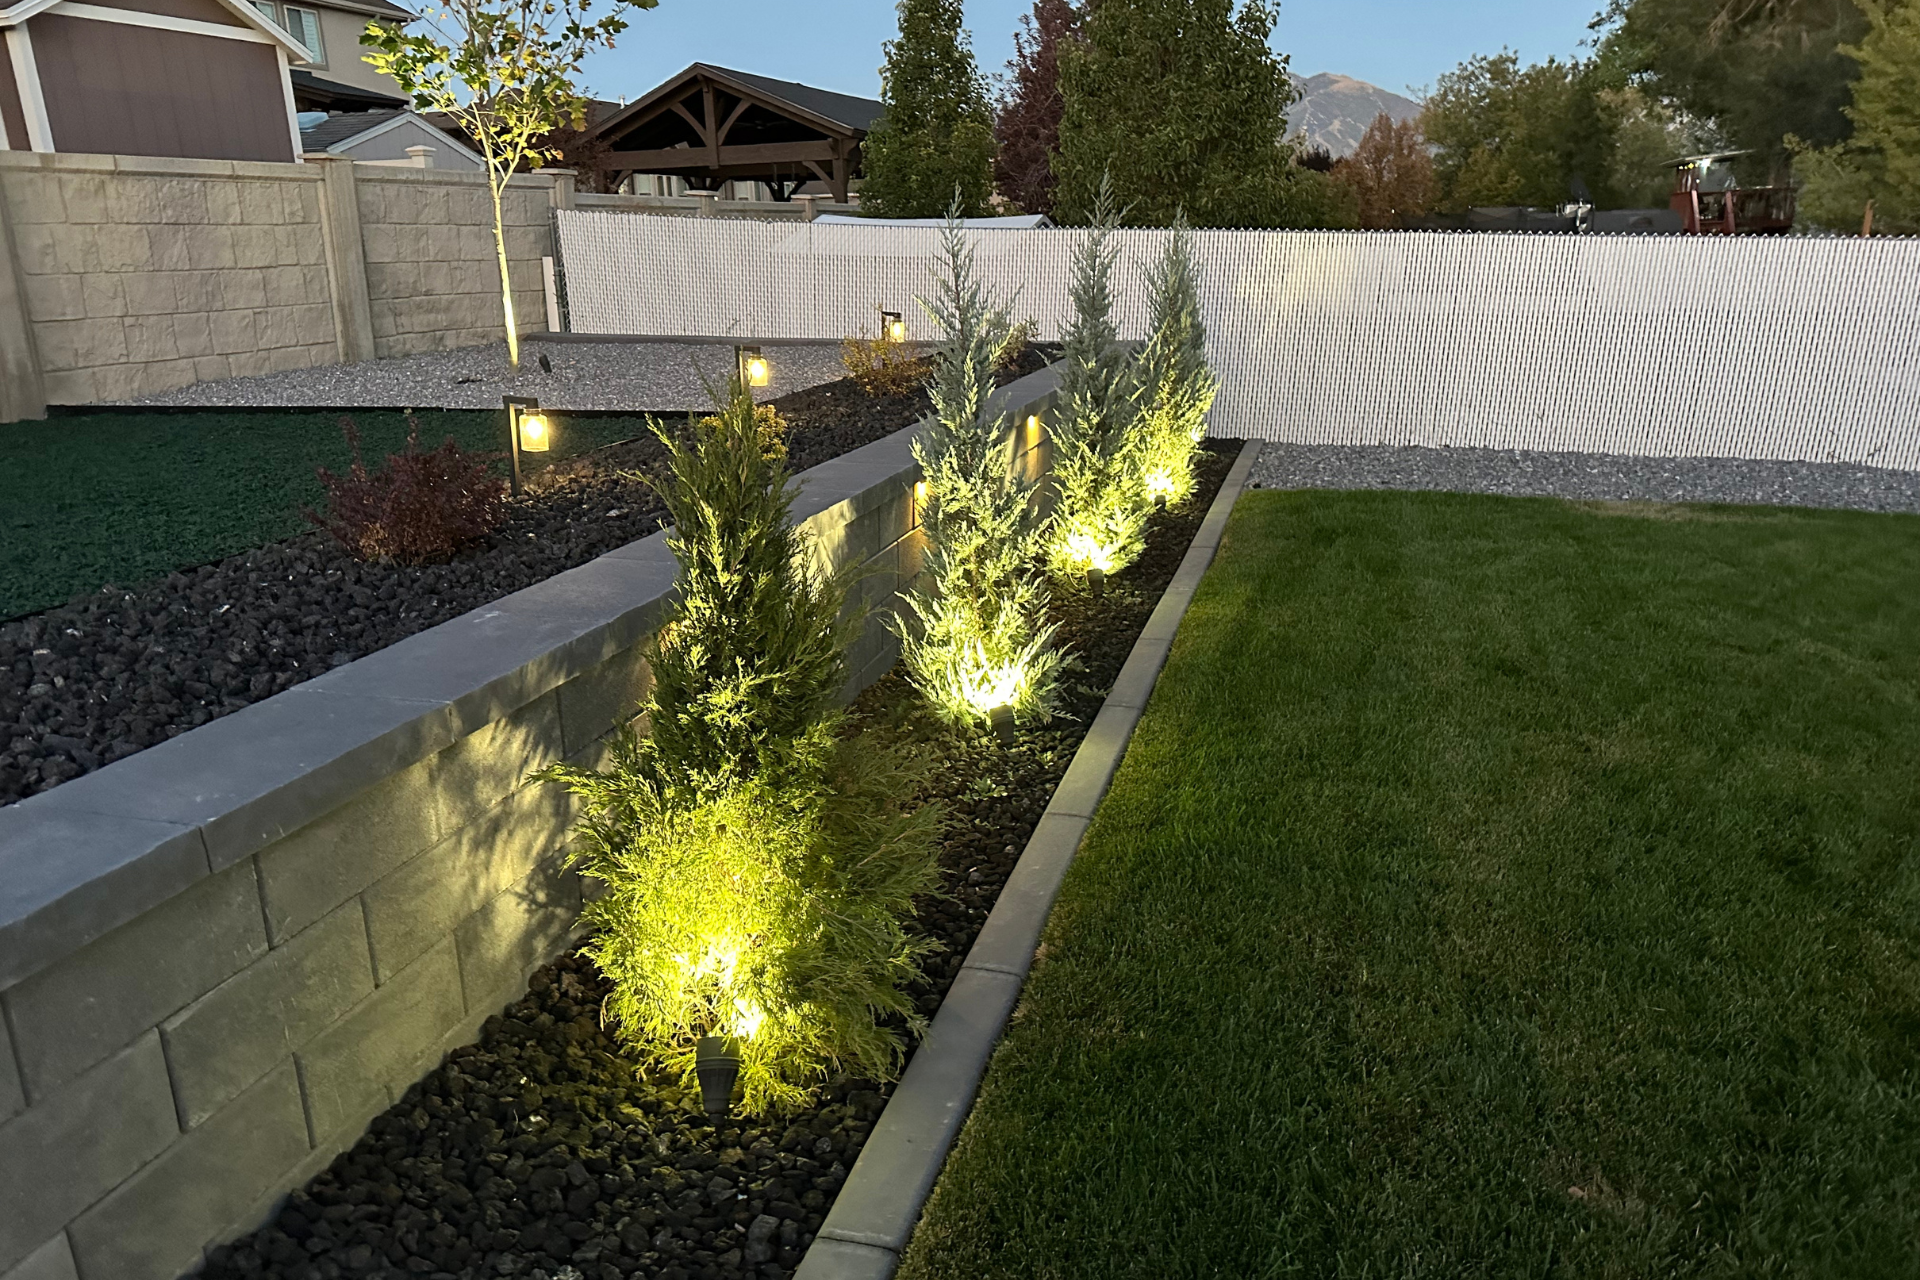 A retaining wall with a row of plants are lit up in a garden with a white fence in the background.